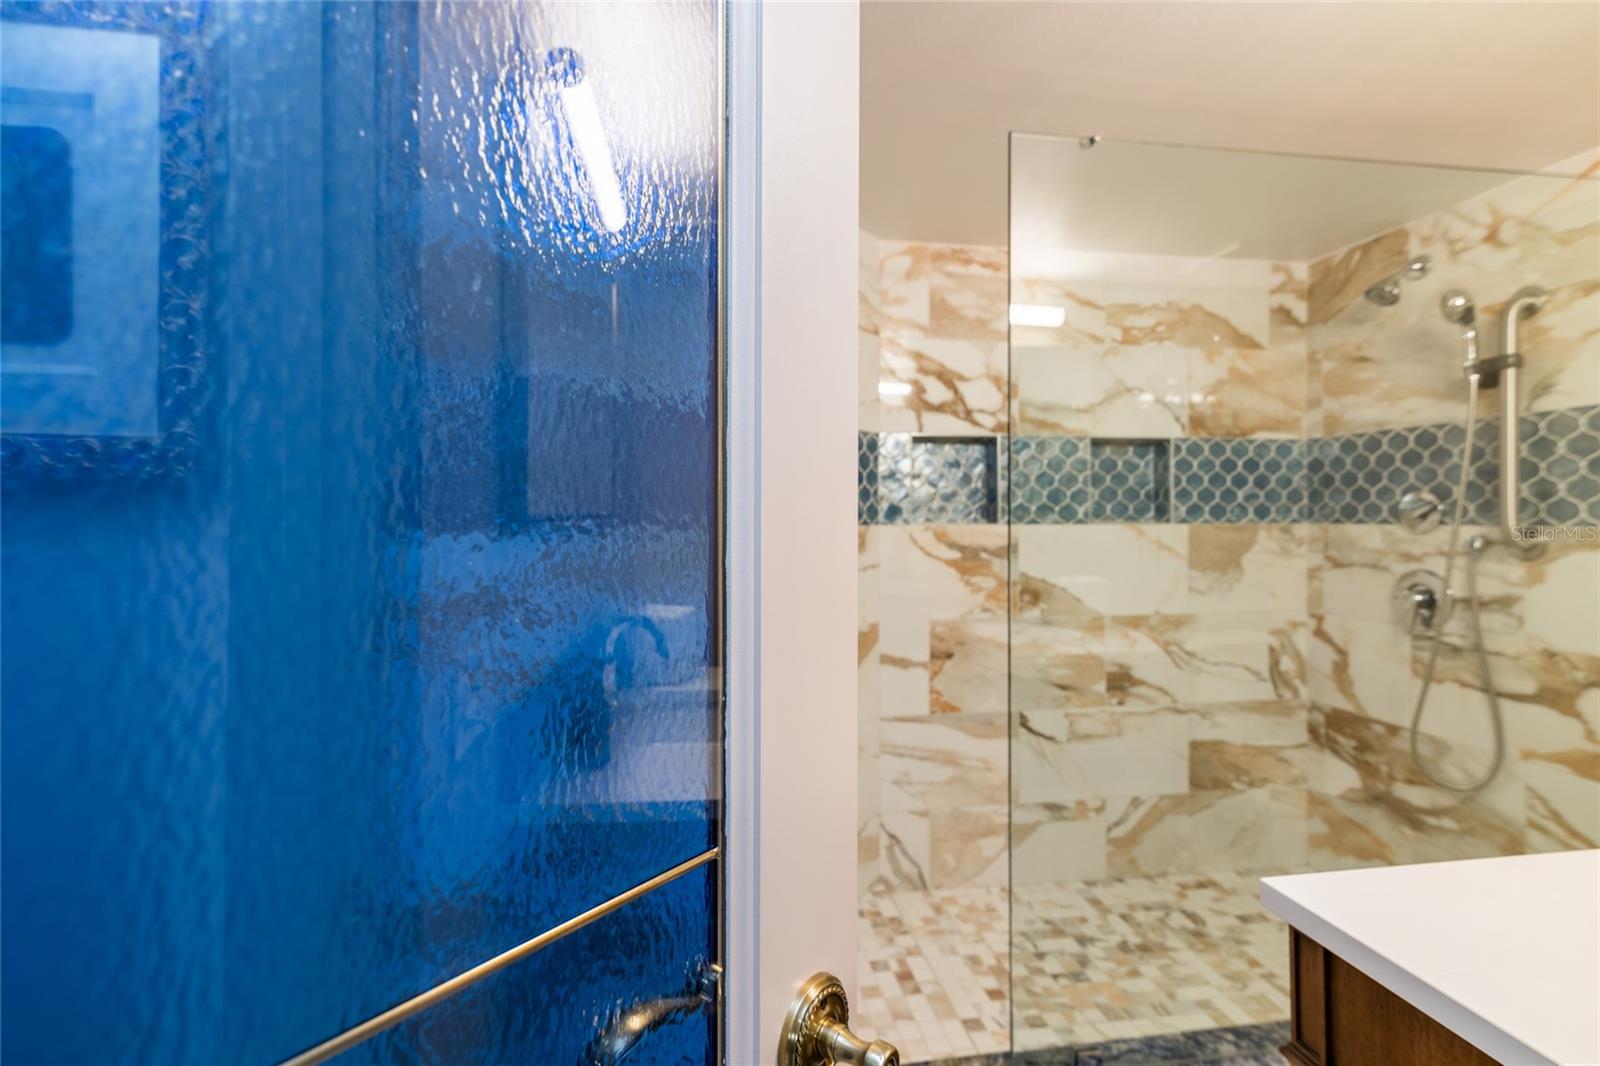 The guest bath has a frameless shower, custom tile work and a beautiful stain glass door.